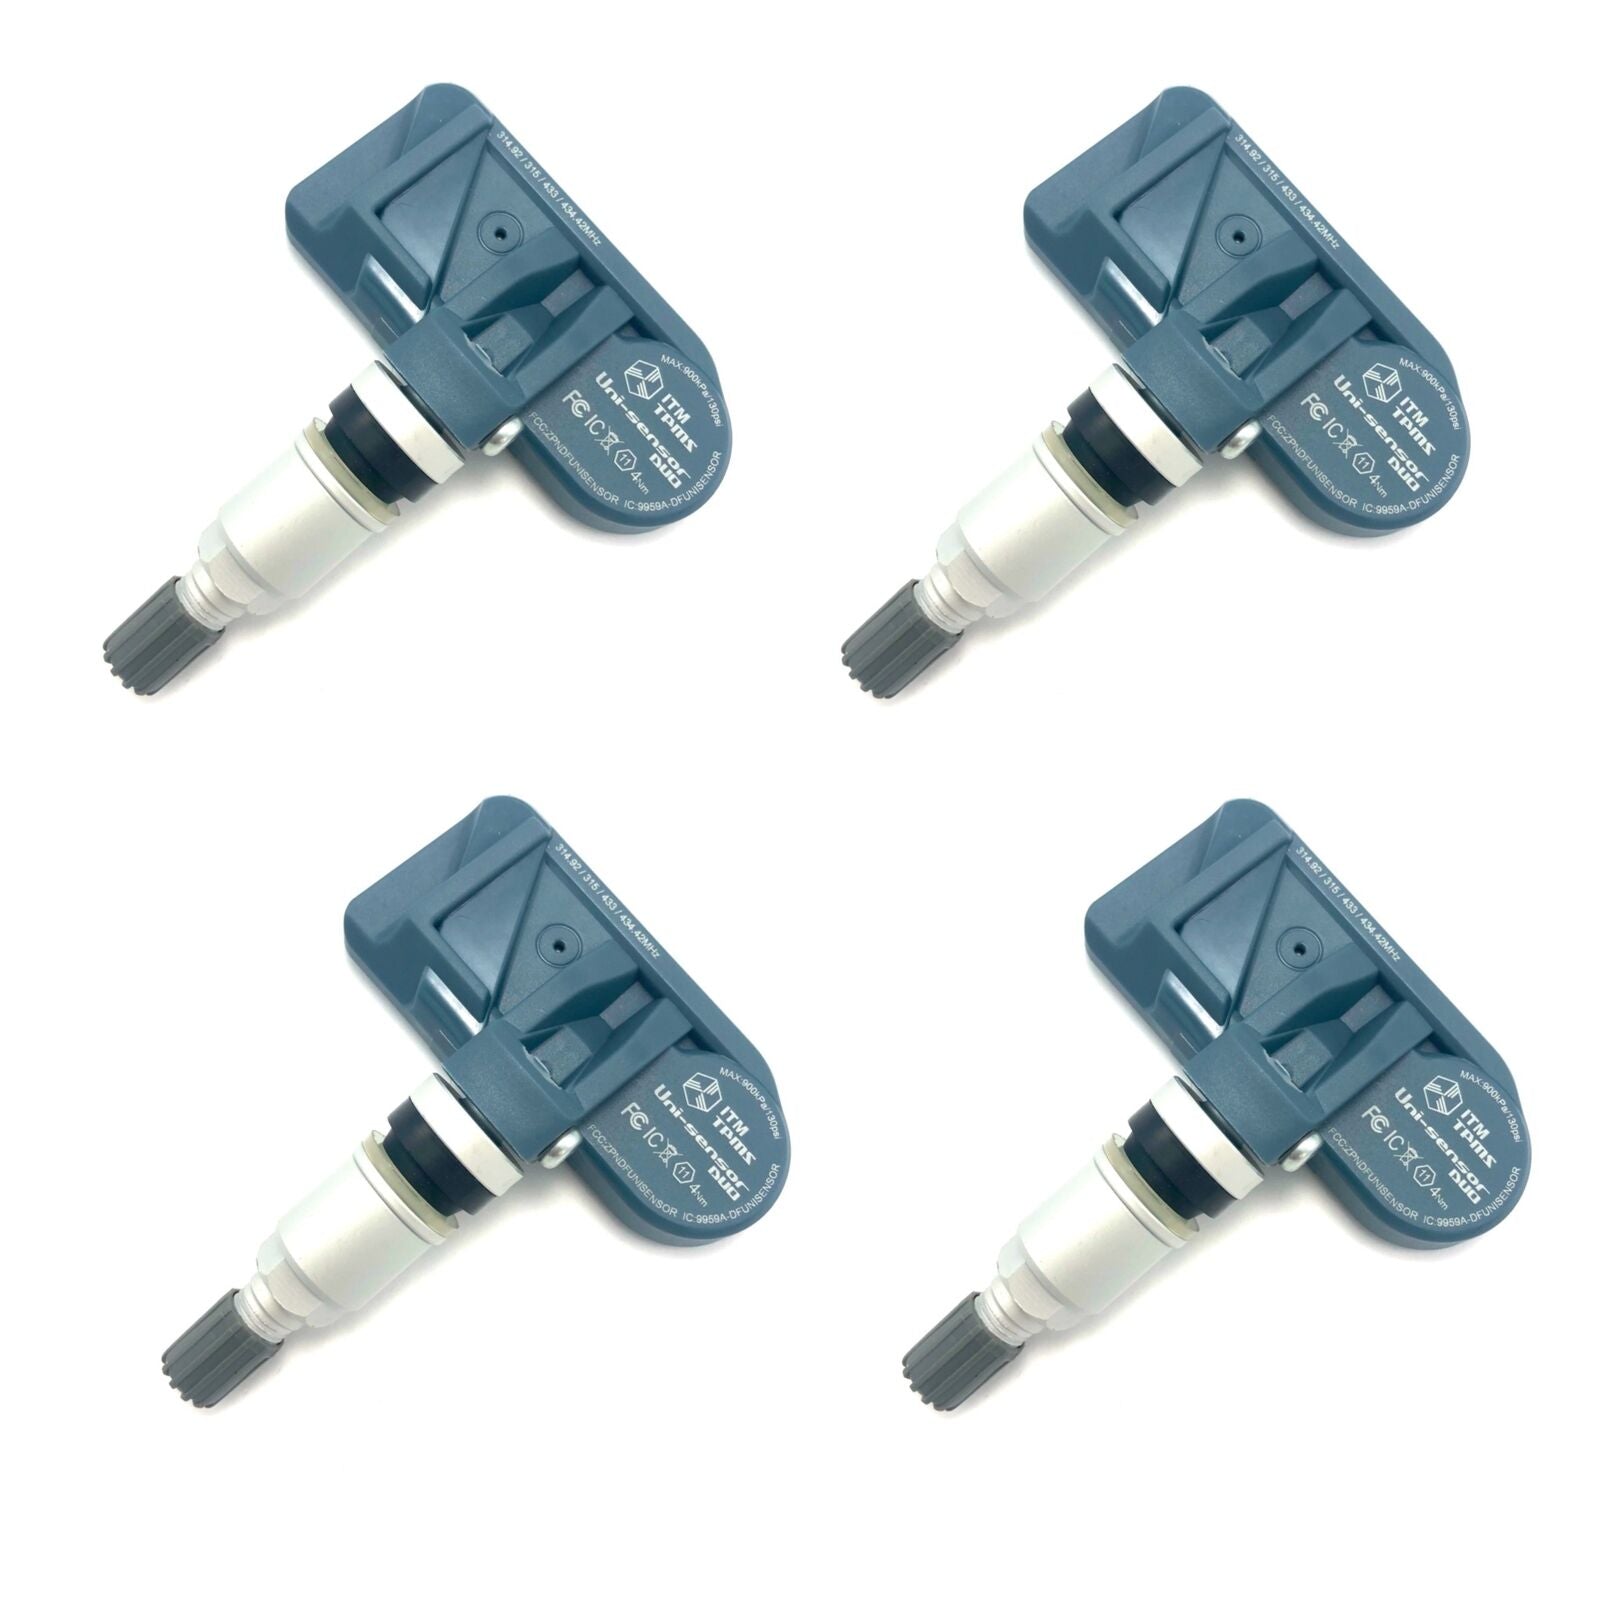 Tesla Model 3/S/X 433MHz  or Bluetooth TPMS "Various Colors" 2012+ (set of four)